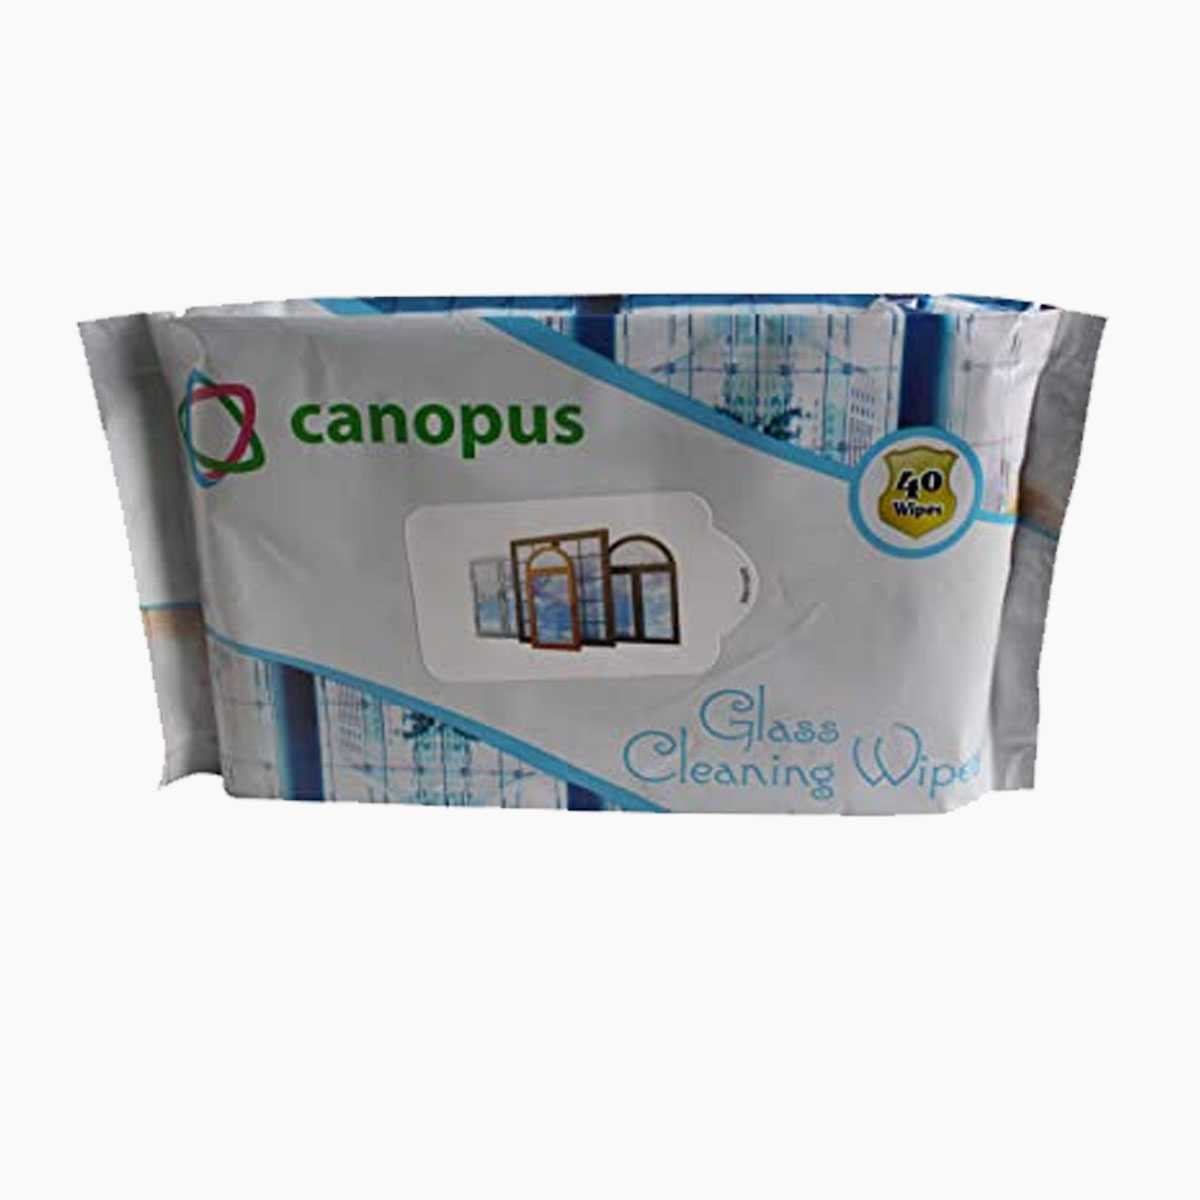 Canopus Glass Cleaning Wipes